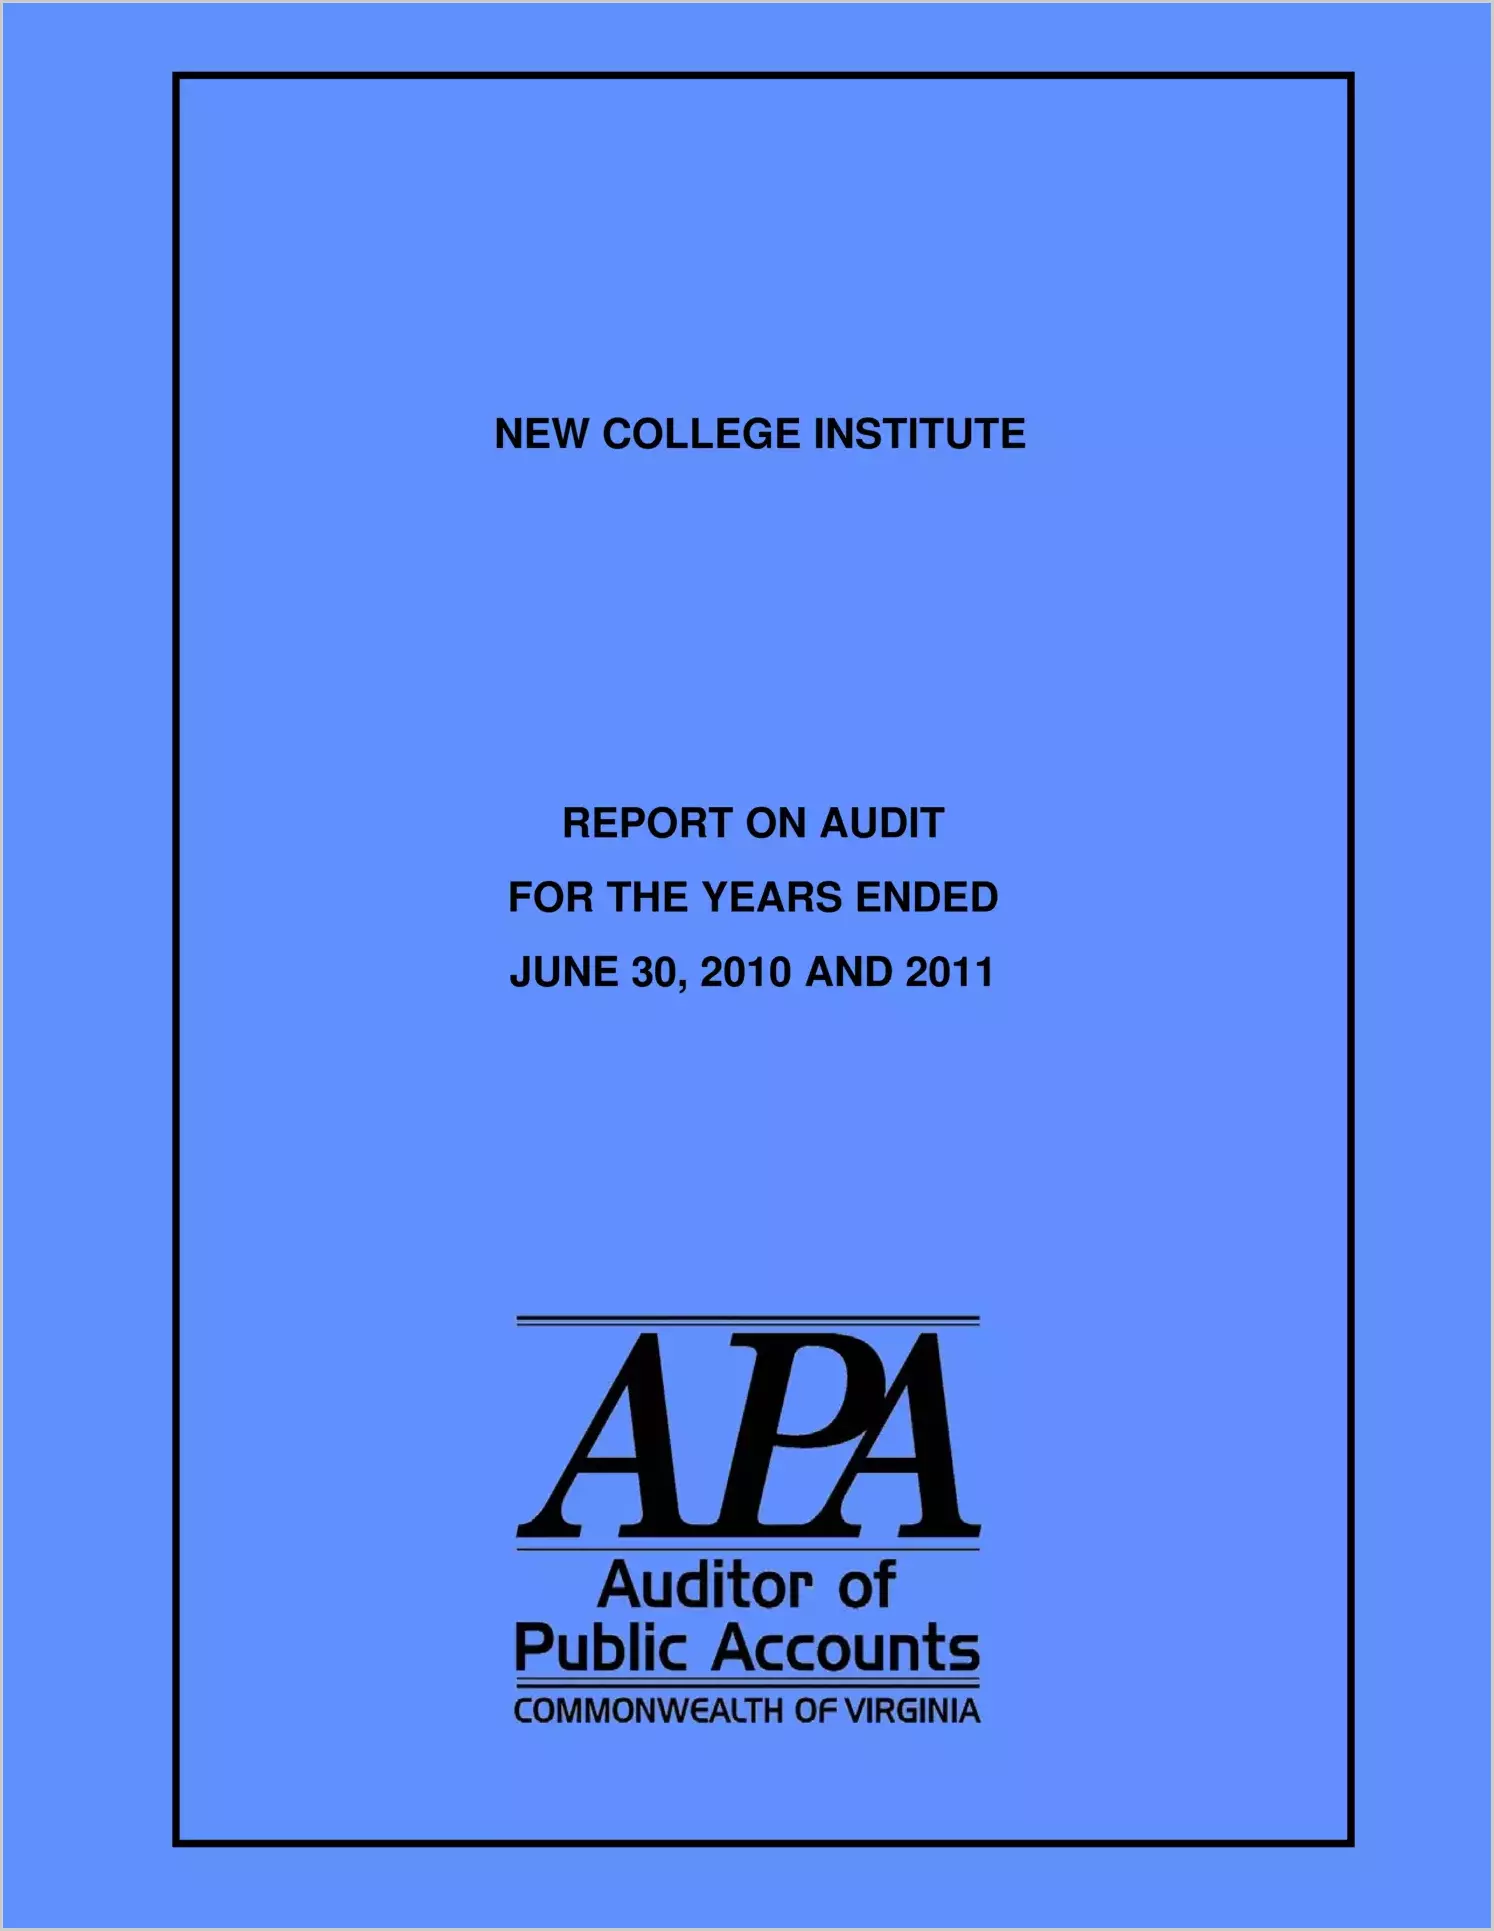 New College Institute Report on Audit for the years ended June 30, 2010 and 2011